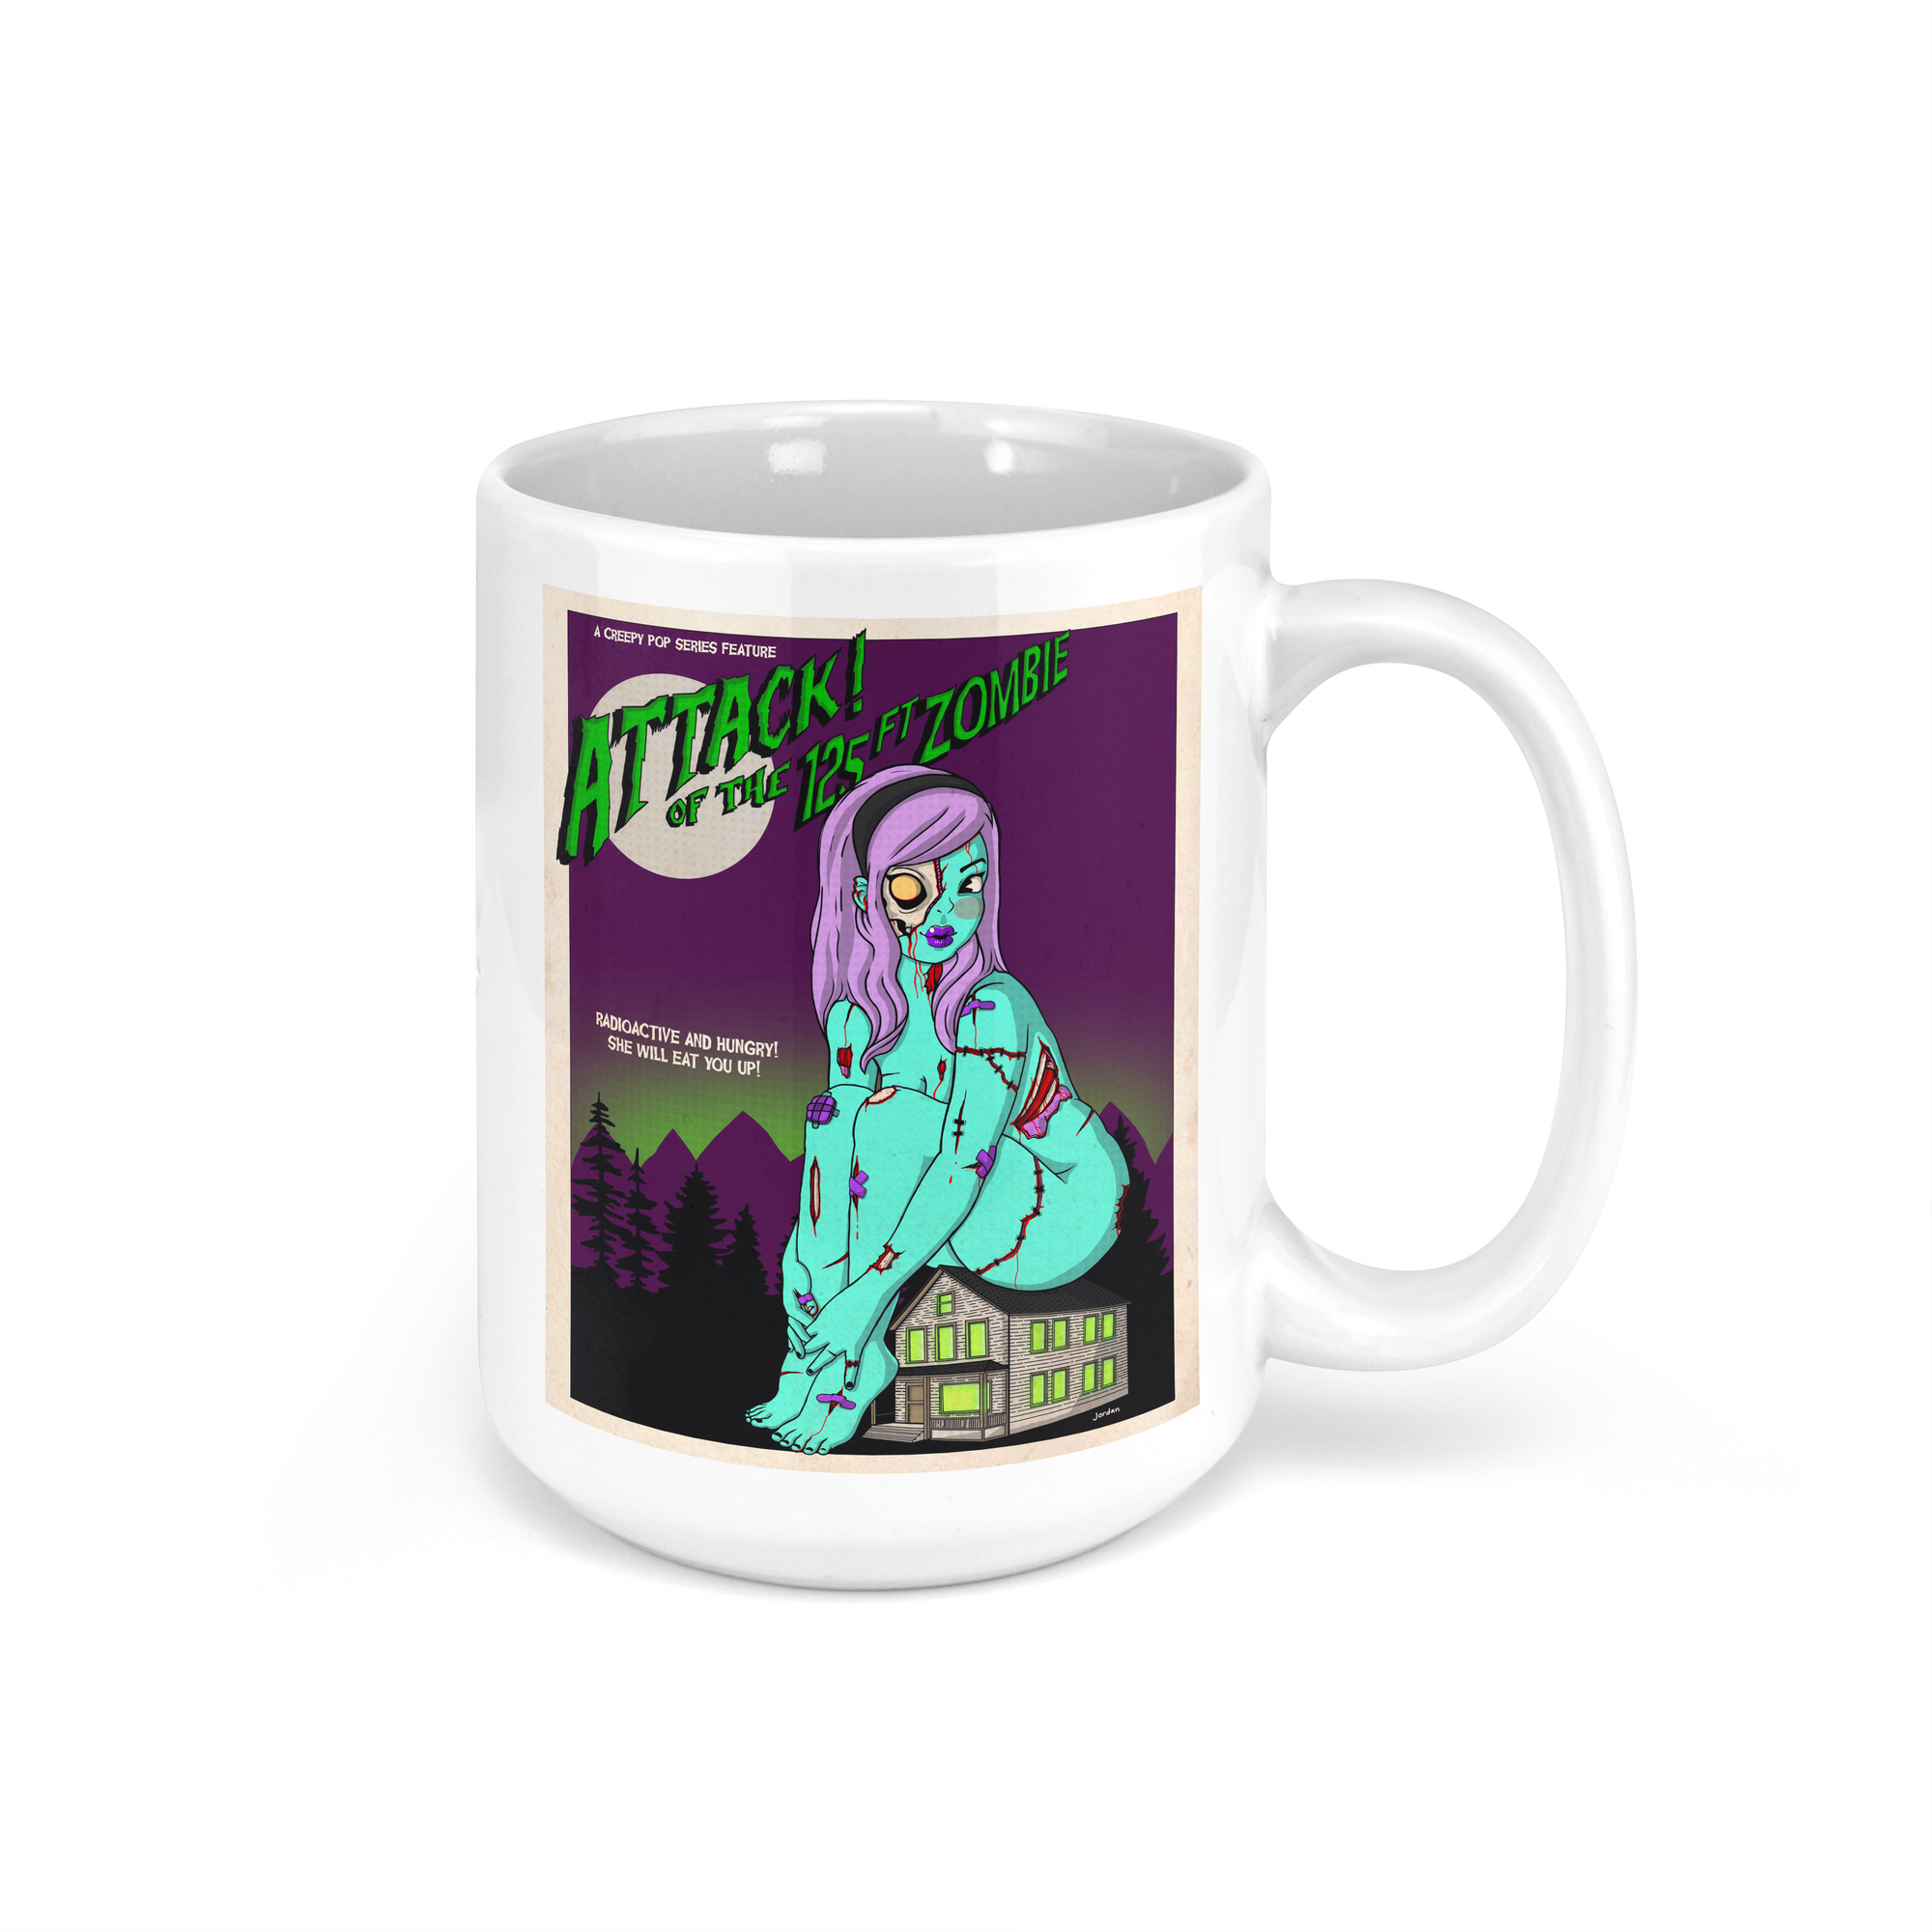 "Attack! Of the 125ft Zombie" - 15oz Coffee Mug